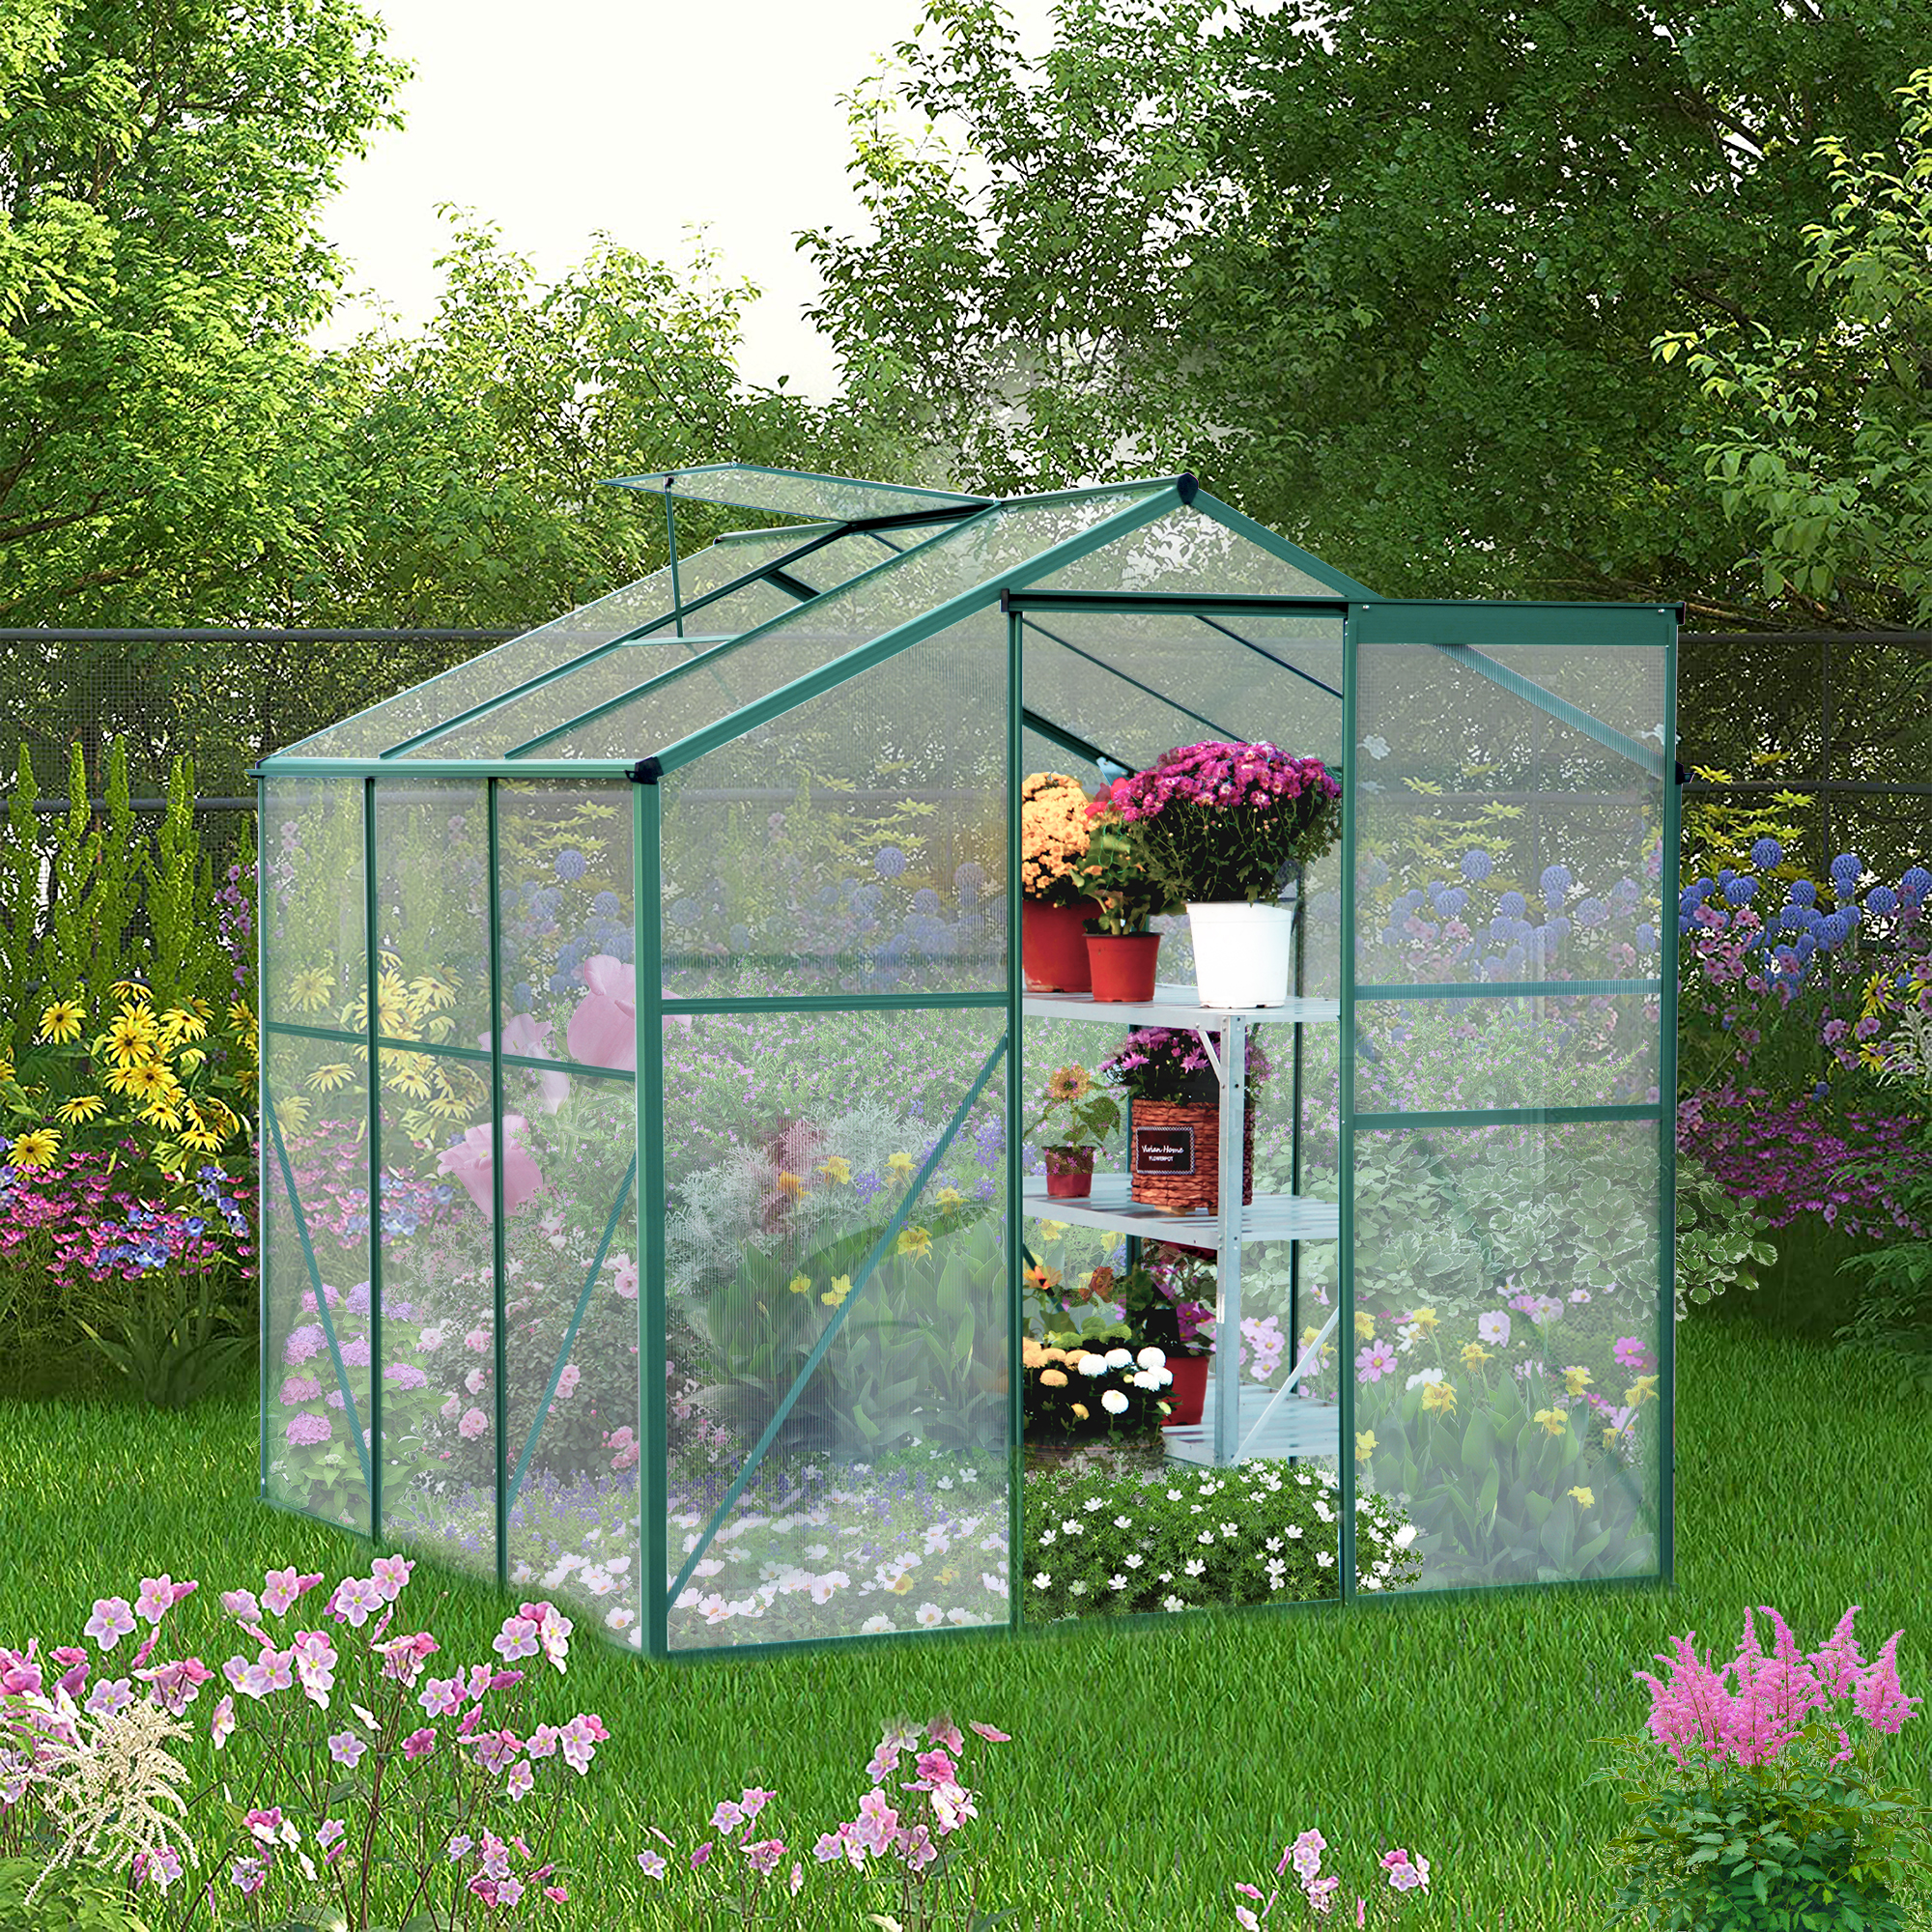 Polycarbonate Walk-in Garden Greenhouse for Flowers in Winter… 4 x 6 x 6.8 FT Outdoor Stable Green House with Adjustable Roof Vent and Rain Gutter for Plants 